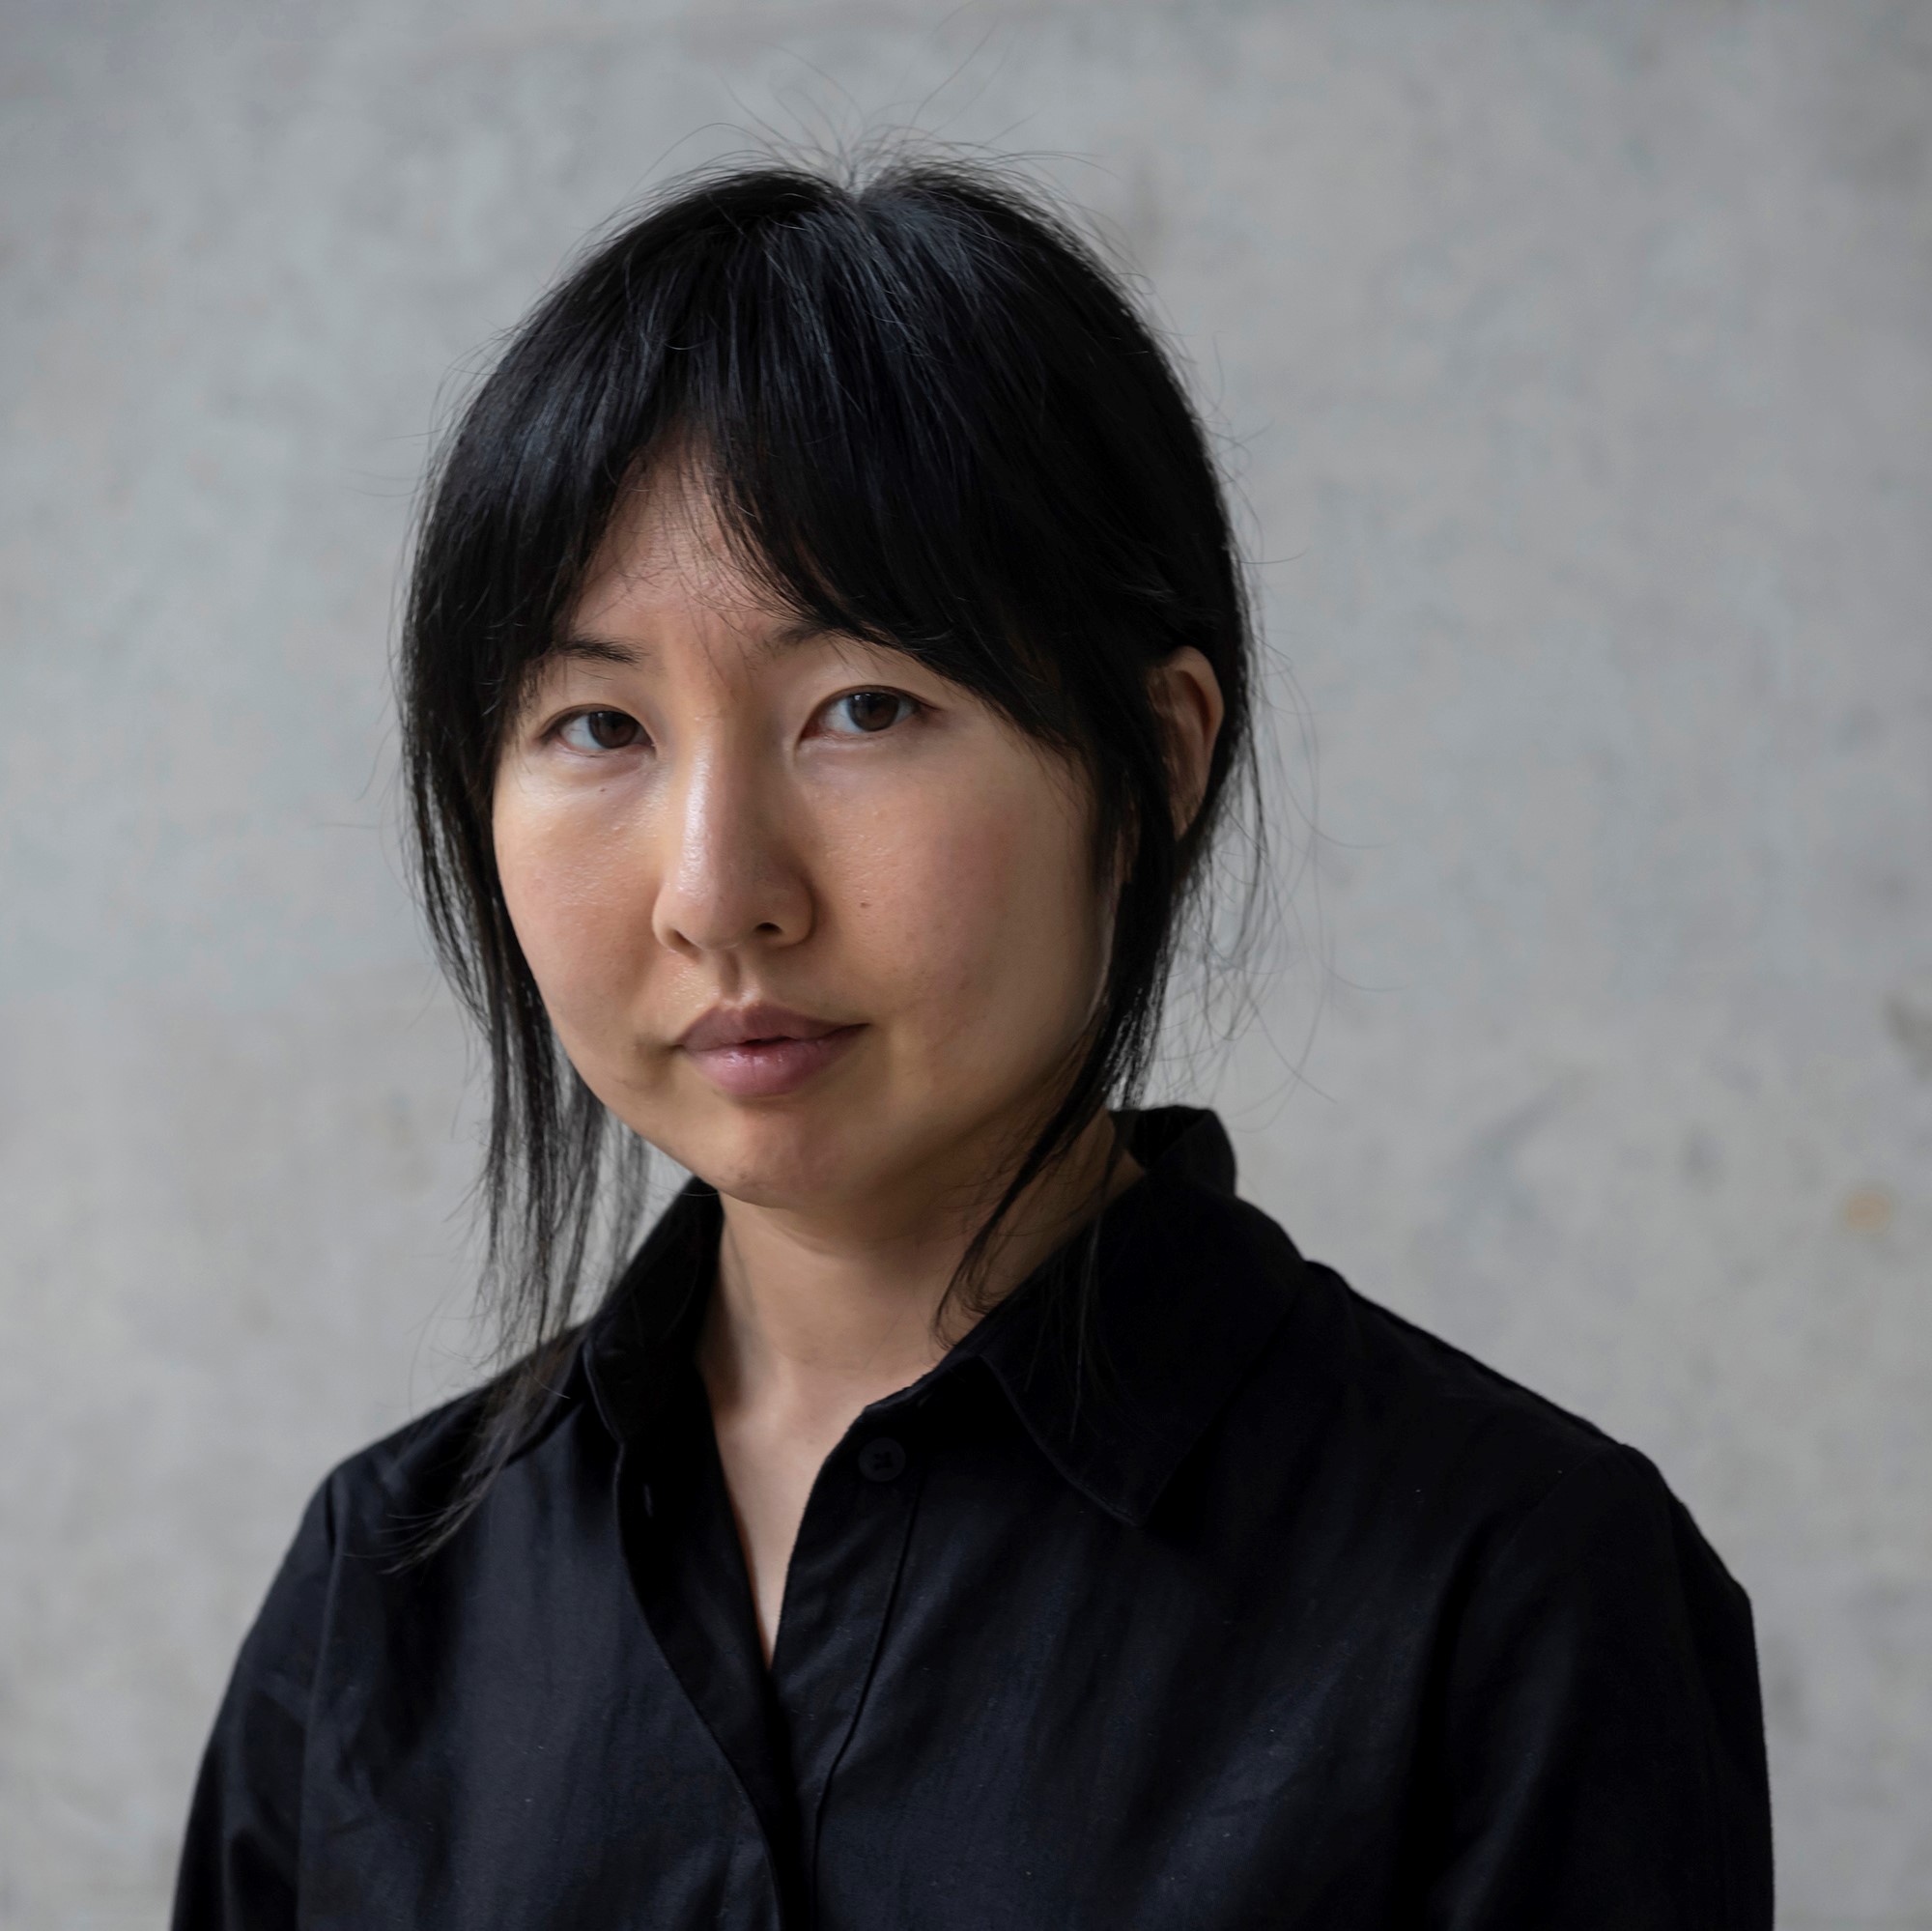 In conversation with Artist, Yona Lee and Curator, Contemporary Art, Natasha Conland